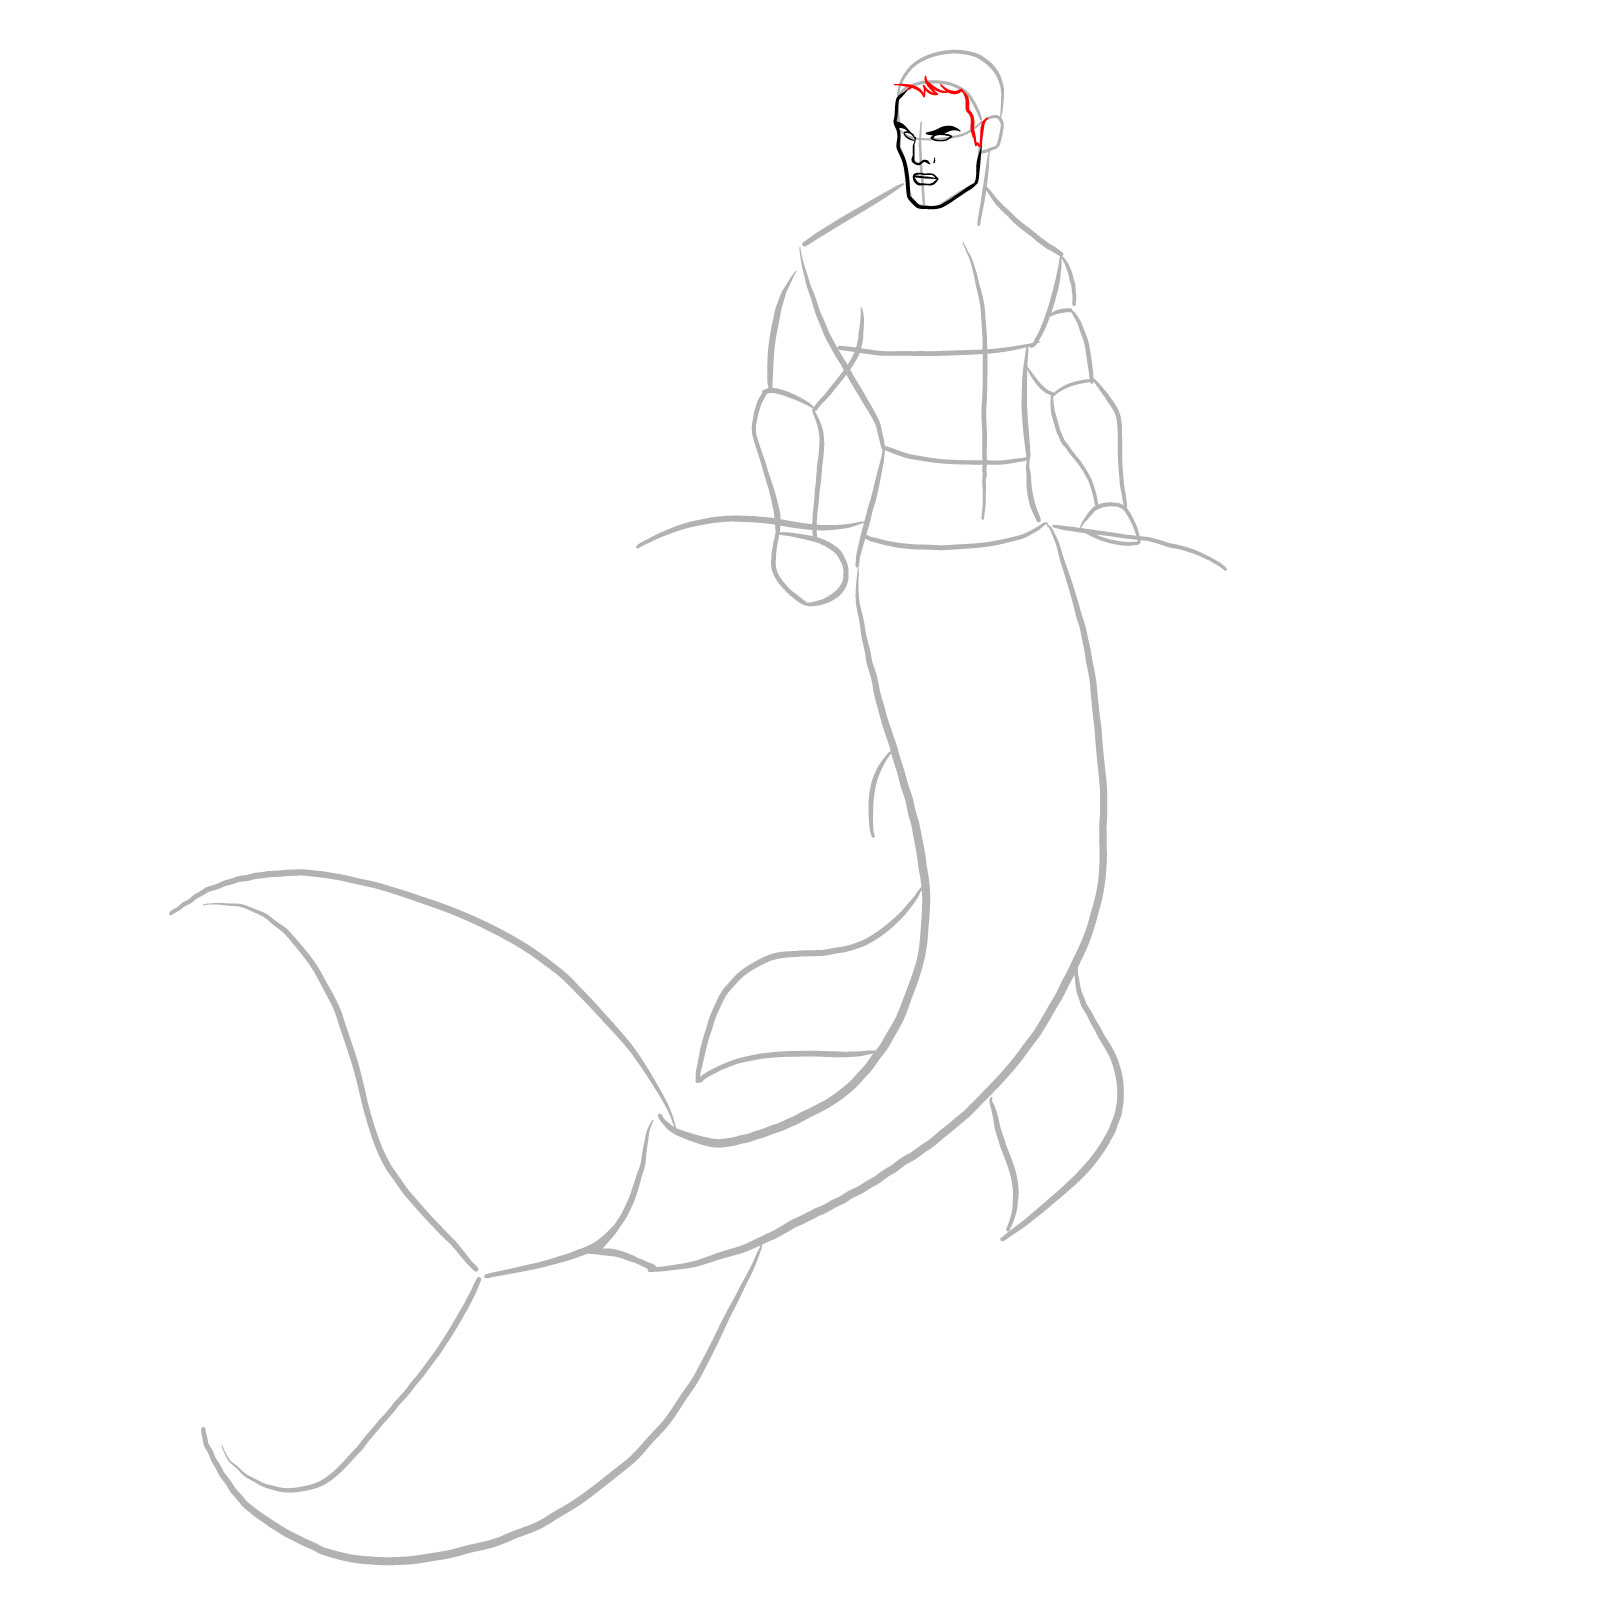 How to draw a Merman - step 08